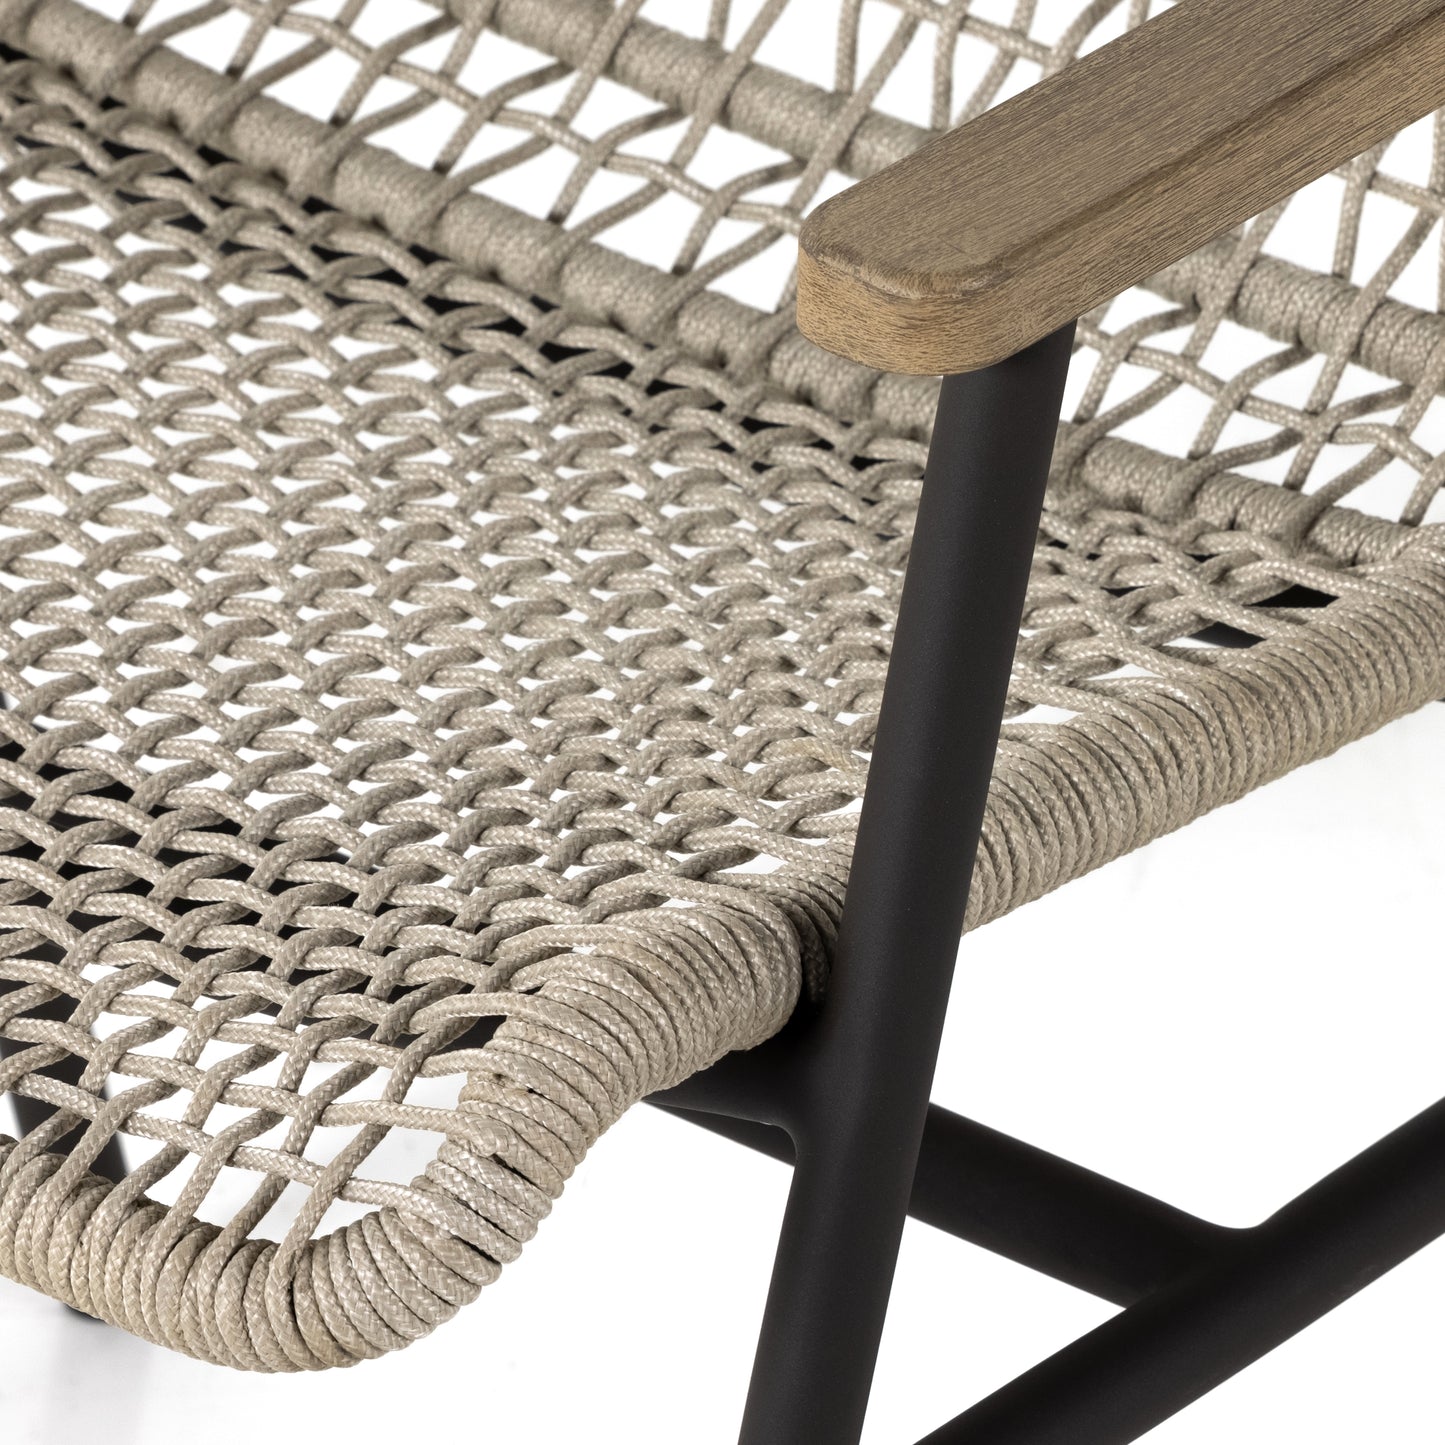 Avera Outdoor Dining Chair Outdoor Seating Four Hands     Four Hands, Mid Century Modern Furniture, Old Bones Furniture Company, Old Bones Co, Modern Mid Century, Designer Furniture, https://www.oldbonesco.com/